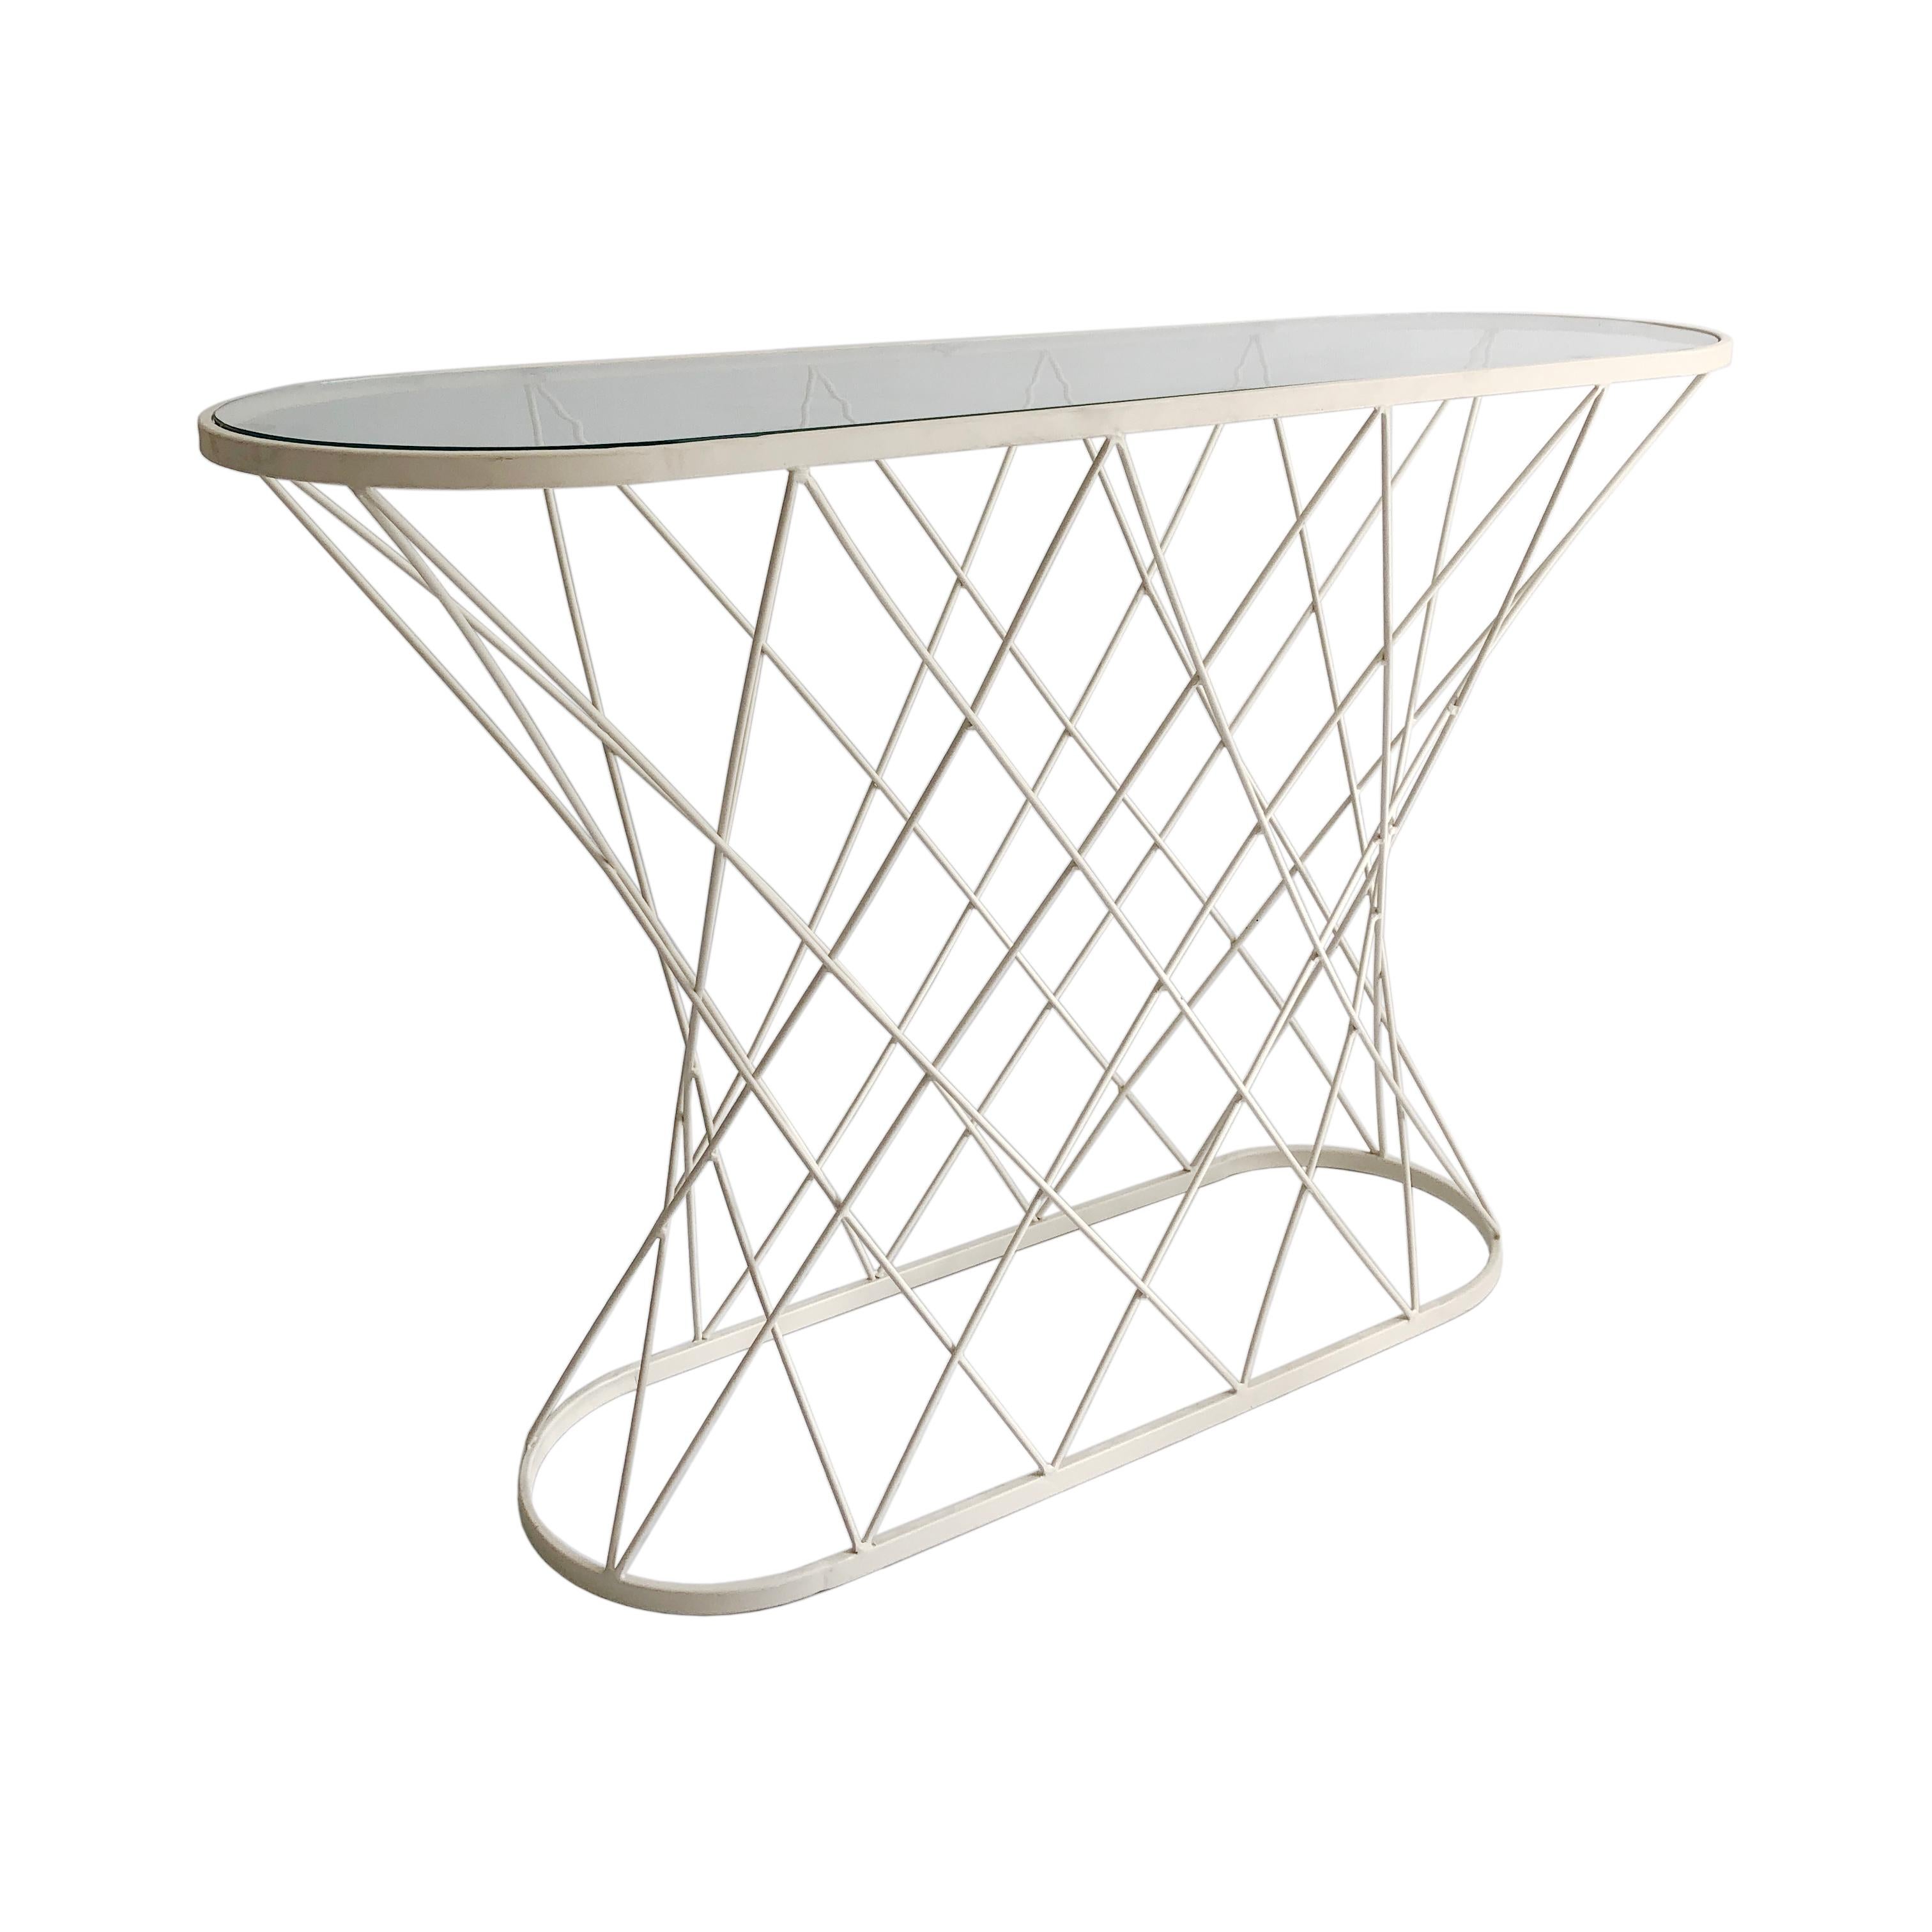 The playful twisted geometric pattern created by this console table gives a superb latticework effect. A white powder-coated metal oval serves as the base for numerous metal poles, crossing on the diagonals and leading to an oval shaped clear glass